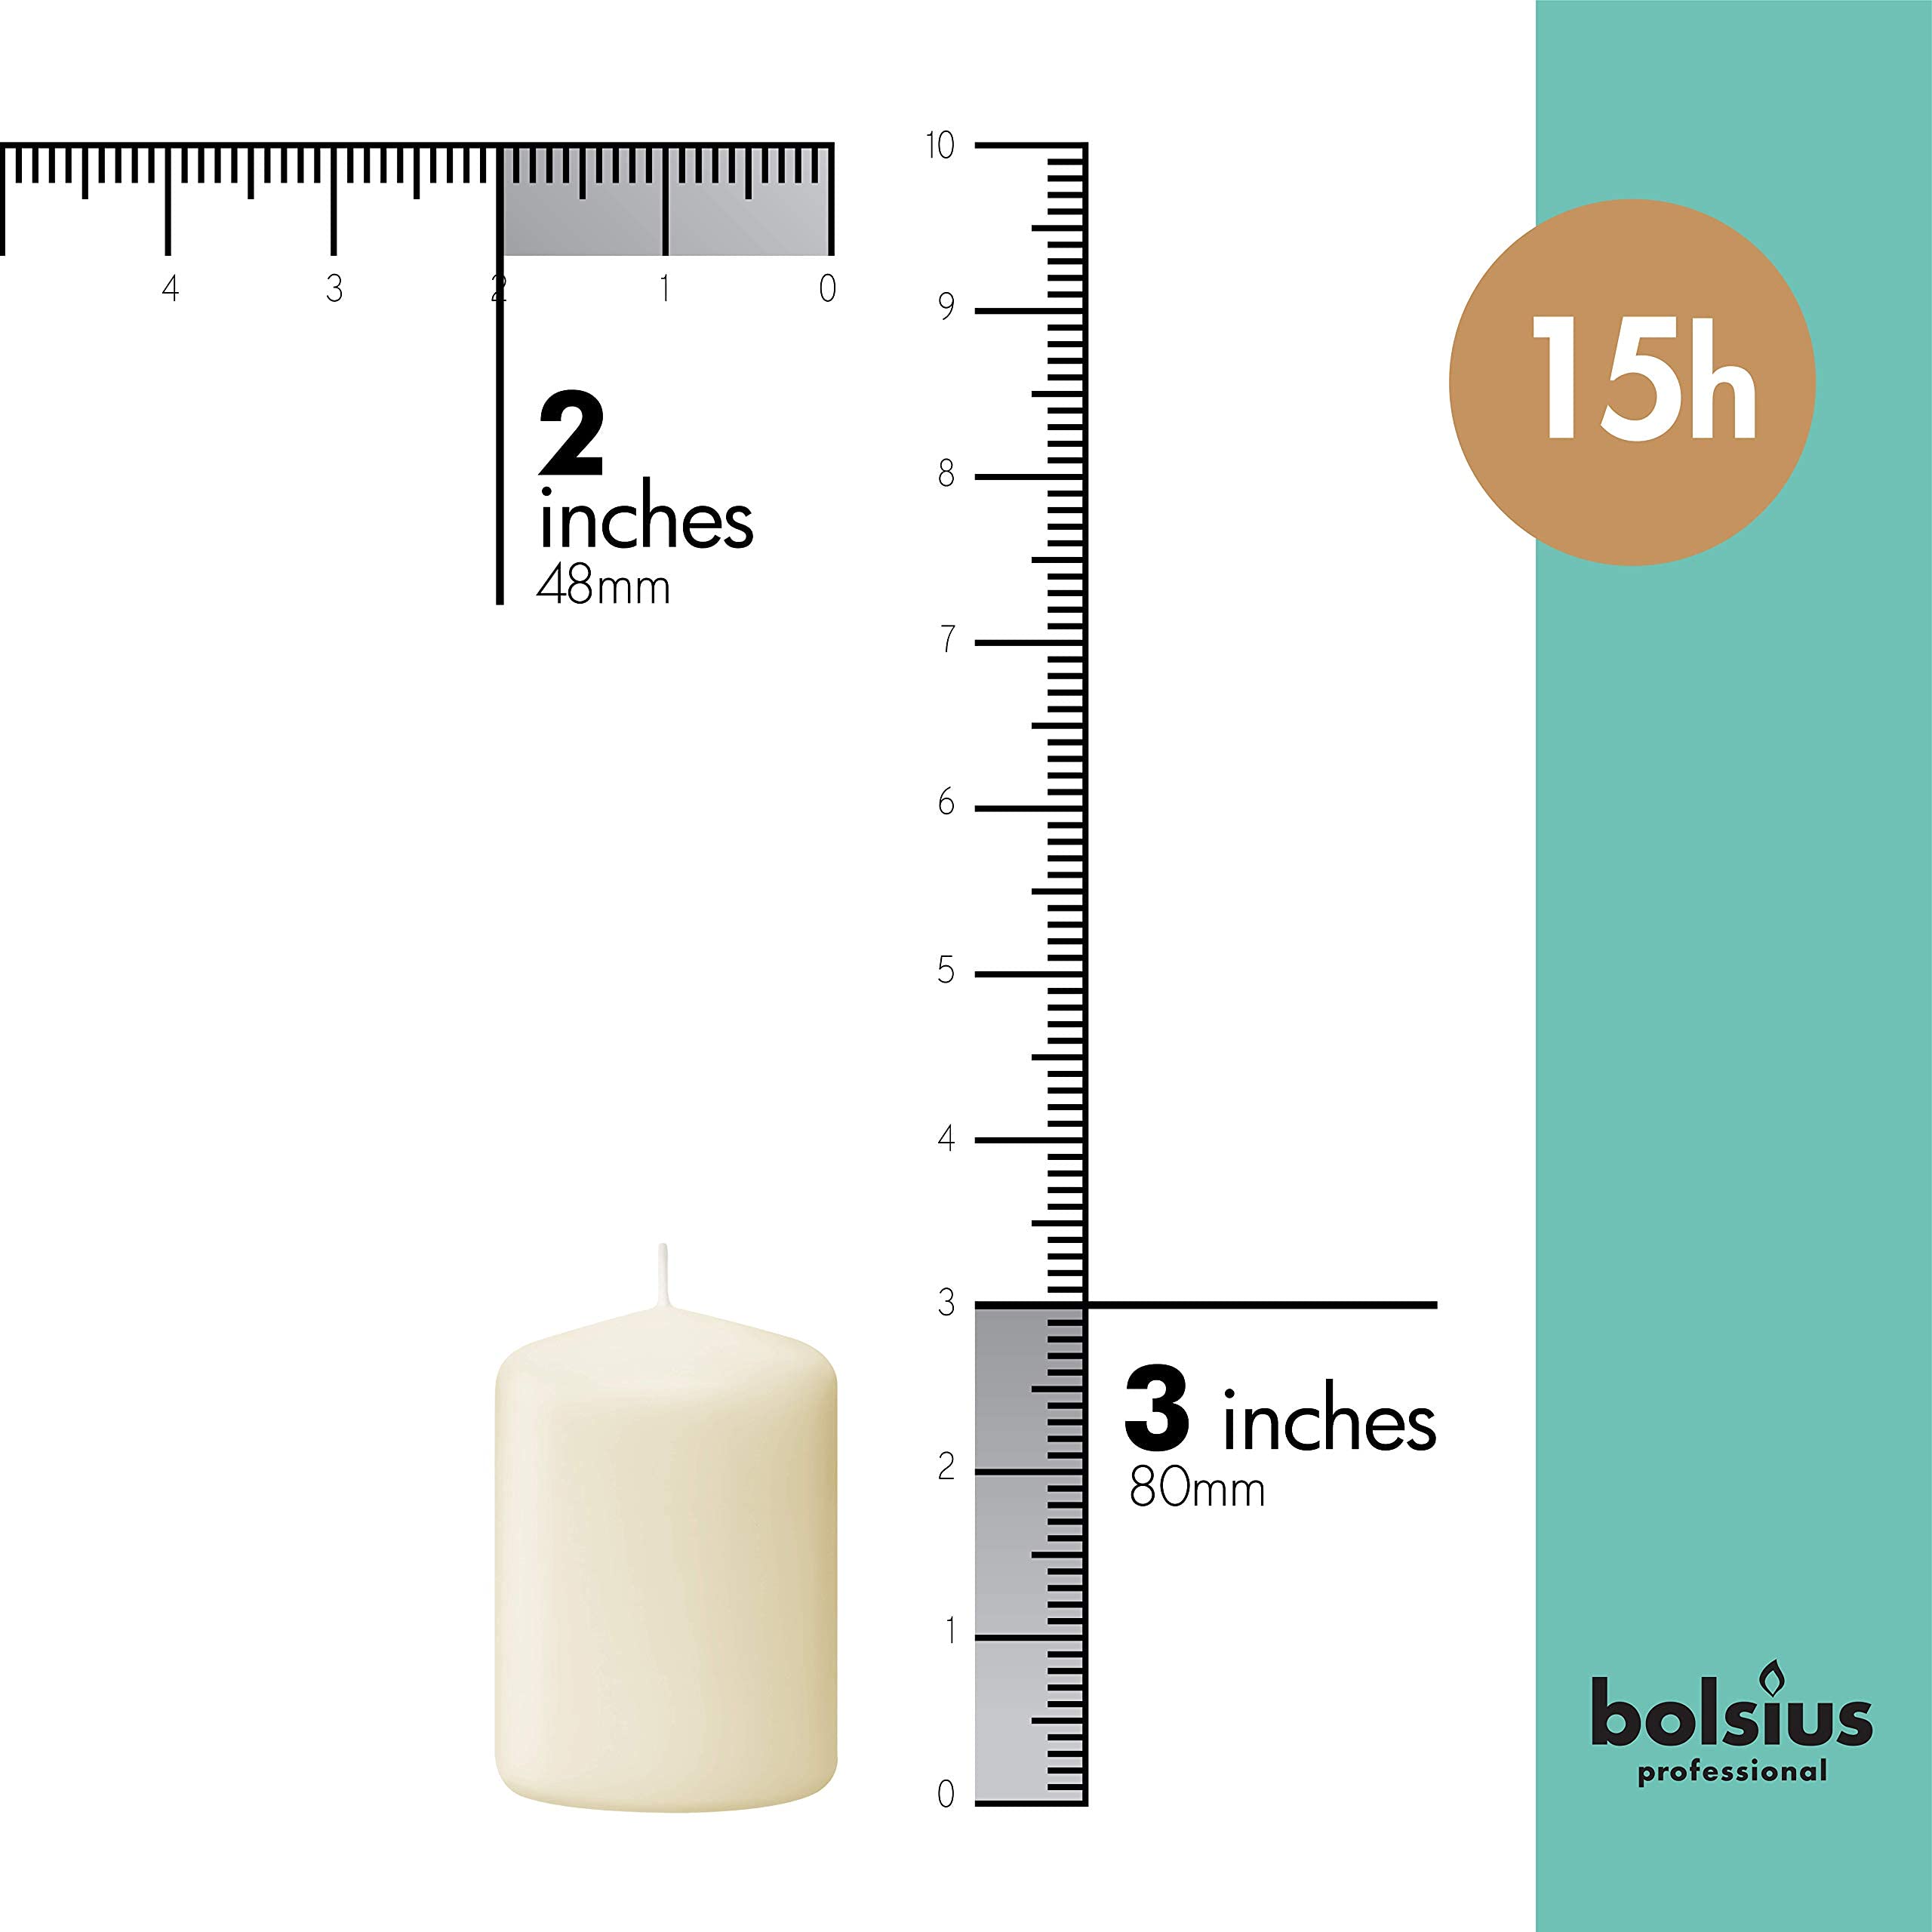 BOLSIUS Set of 20 Ivory Pillar Candles - Unscented Candle Set - Dripless Clean Burning Smokeless Dinner Candle - Perfect for Wedding Candles, Parties and Special Occasions  - Acceptable